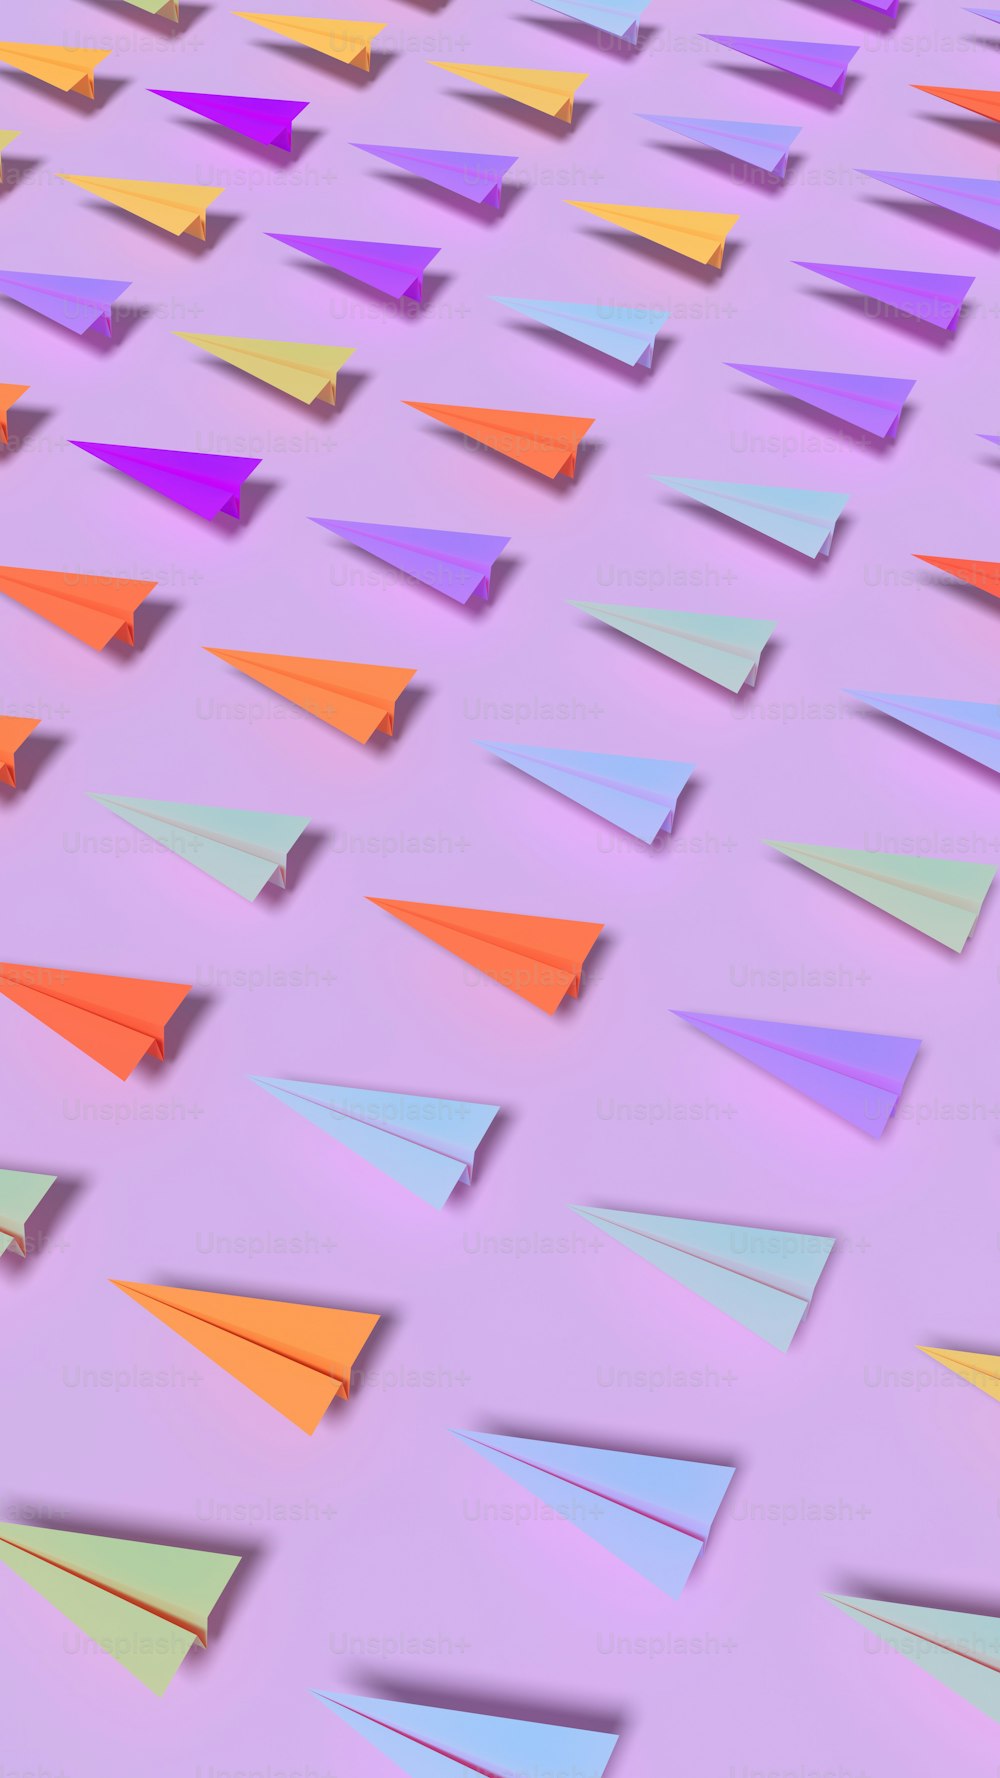 a group of colorful paper airplanes on a purple background